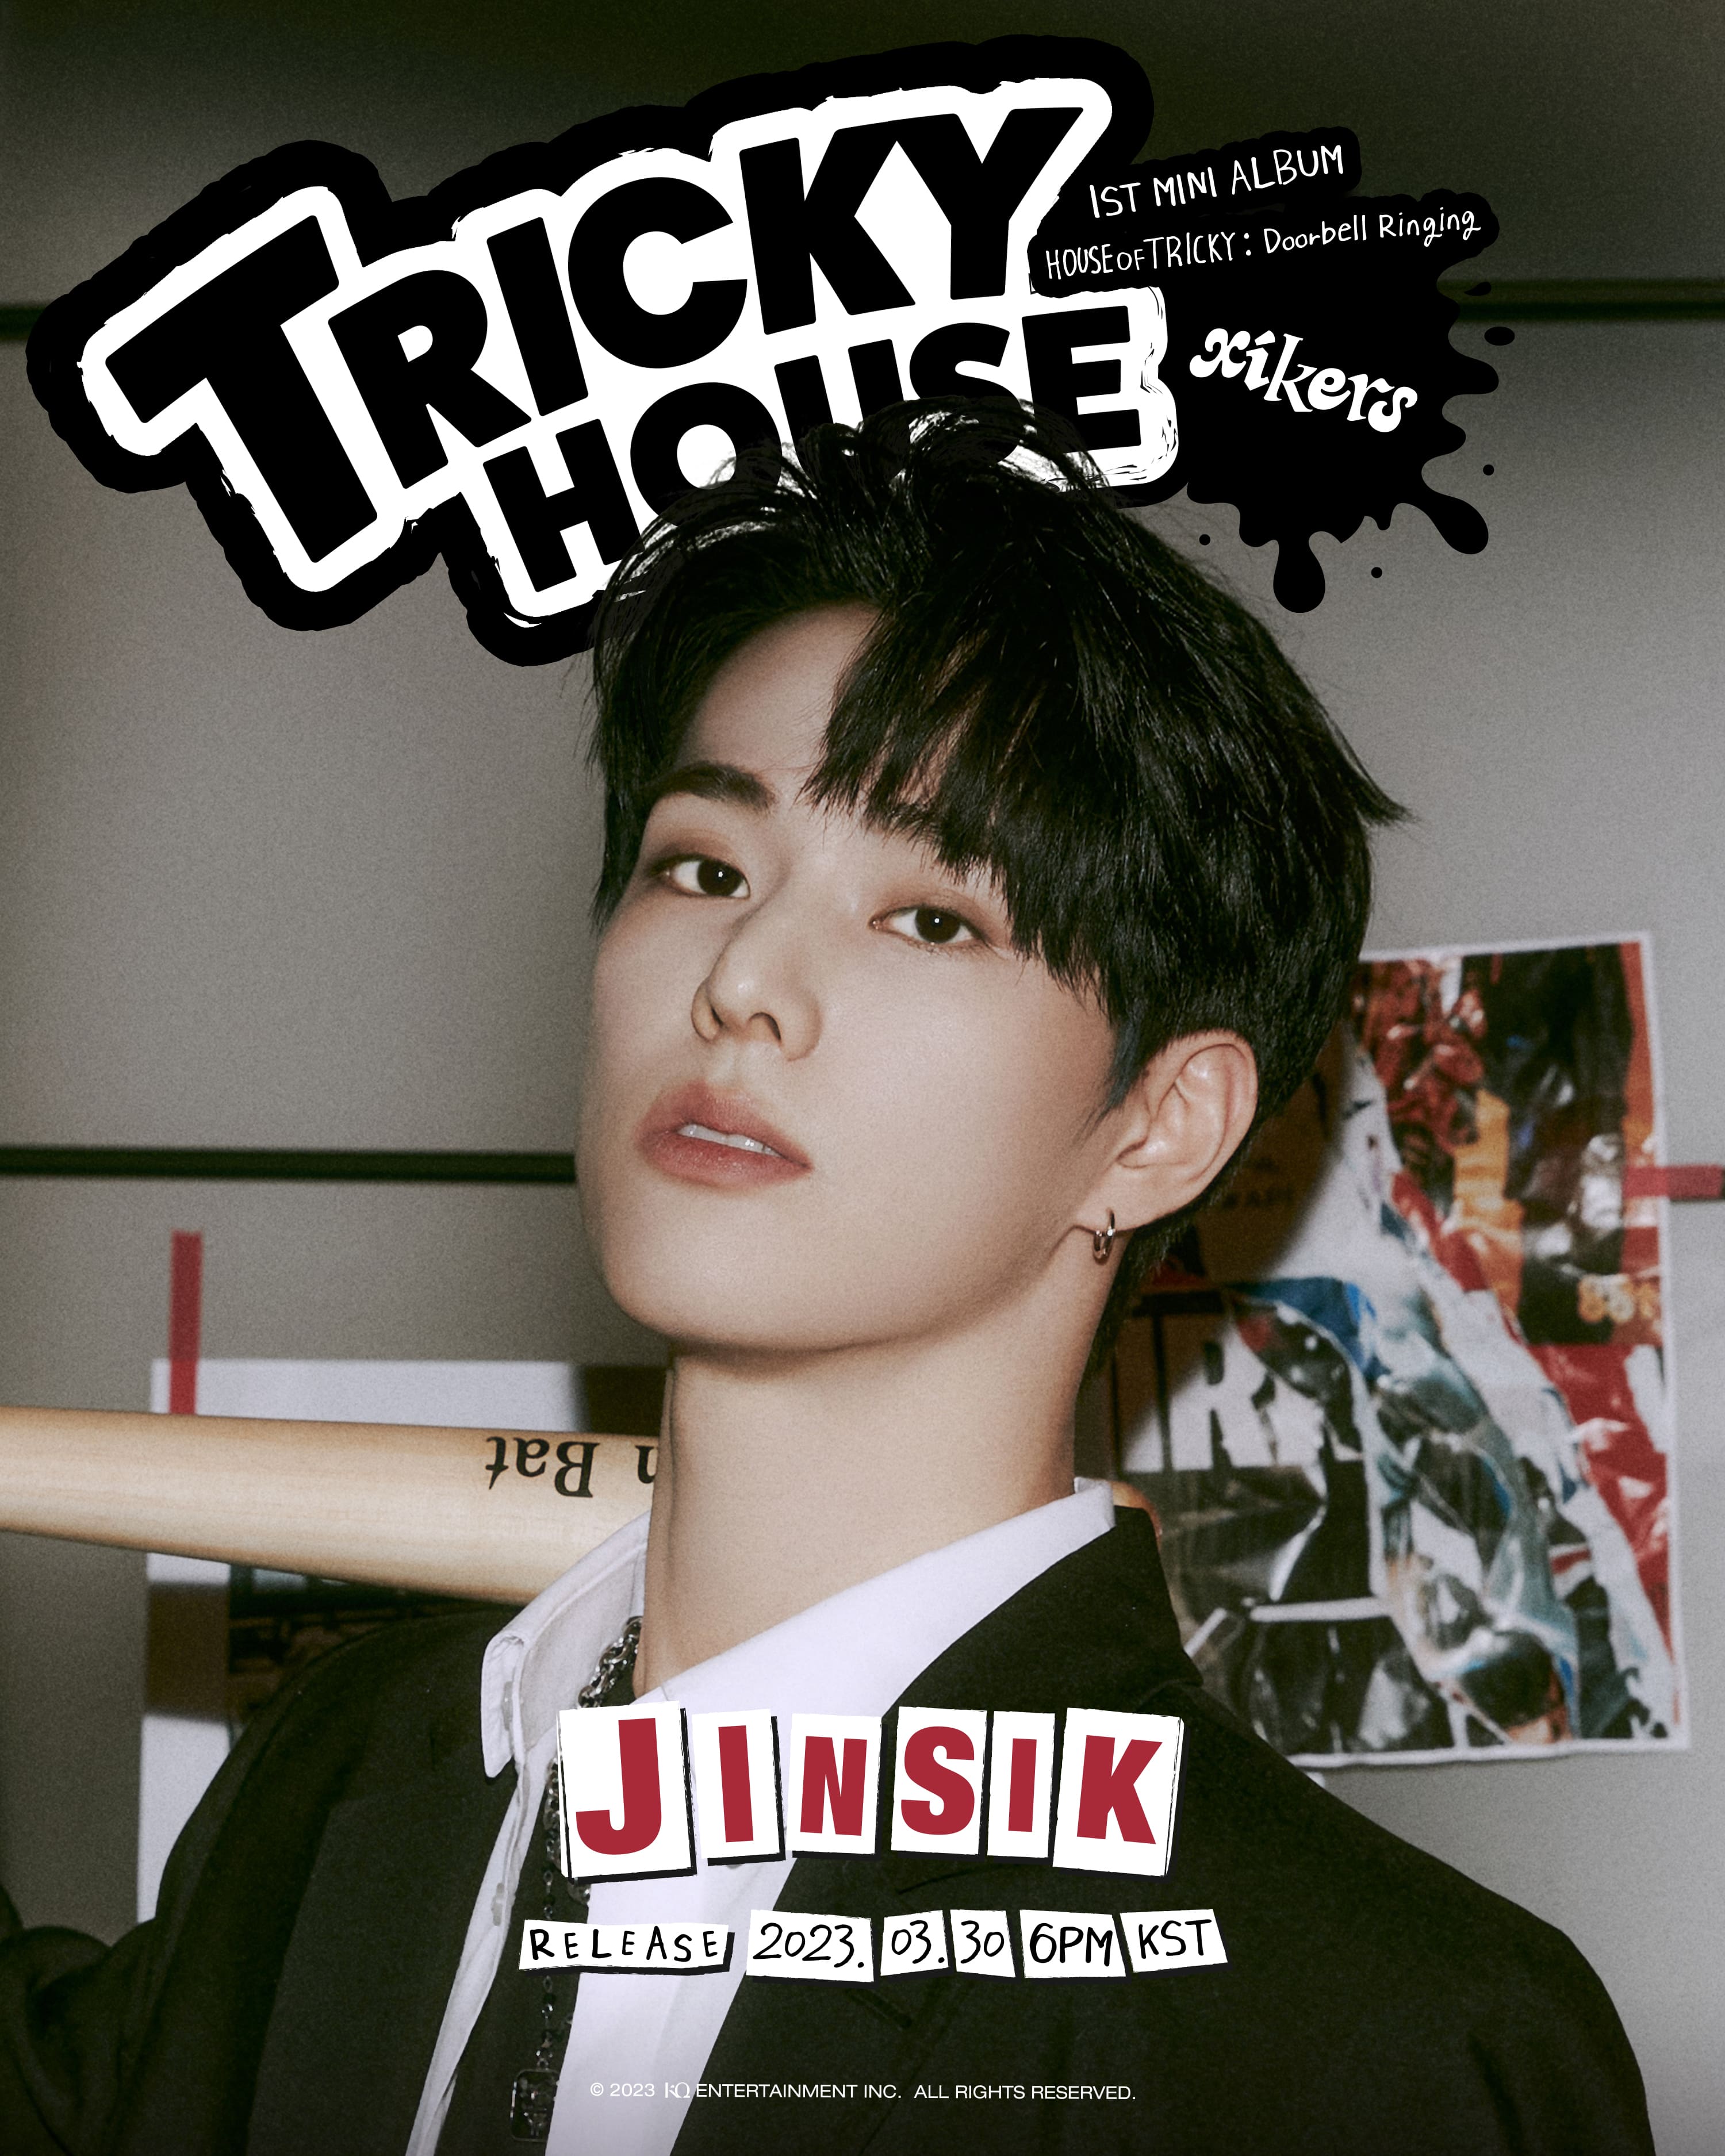 xikers - 1ST MINI ALBUM ‘HOUSE OF TRICKY : Doorbell Ringing’ - Concept Photo Jinsik